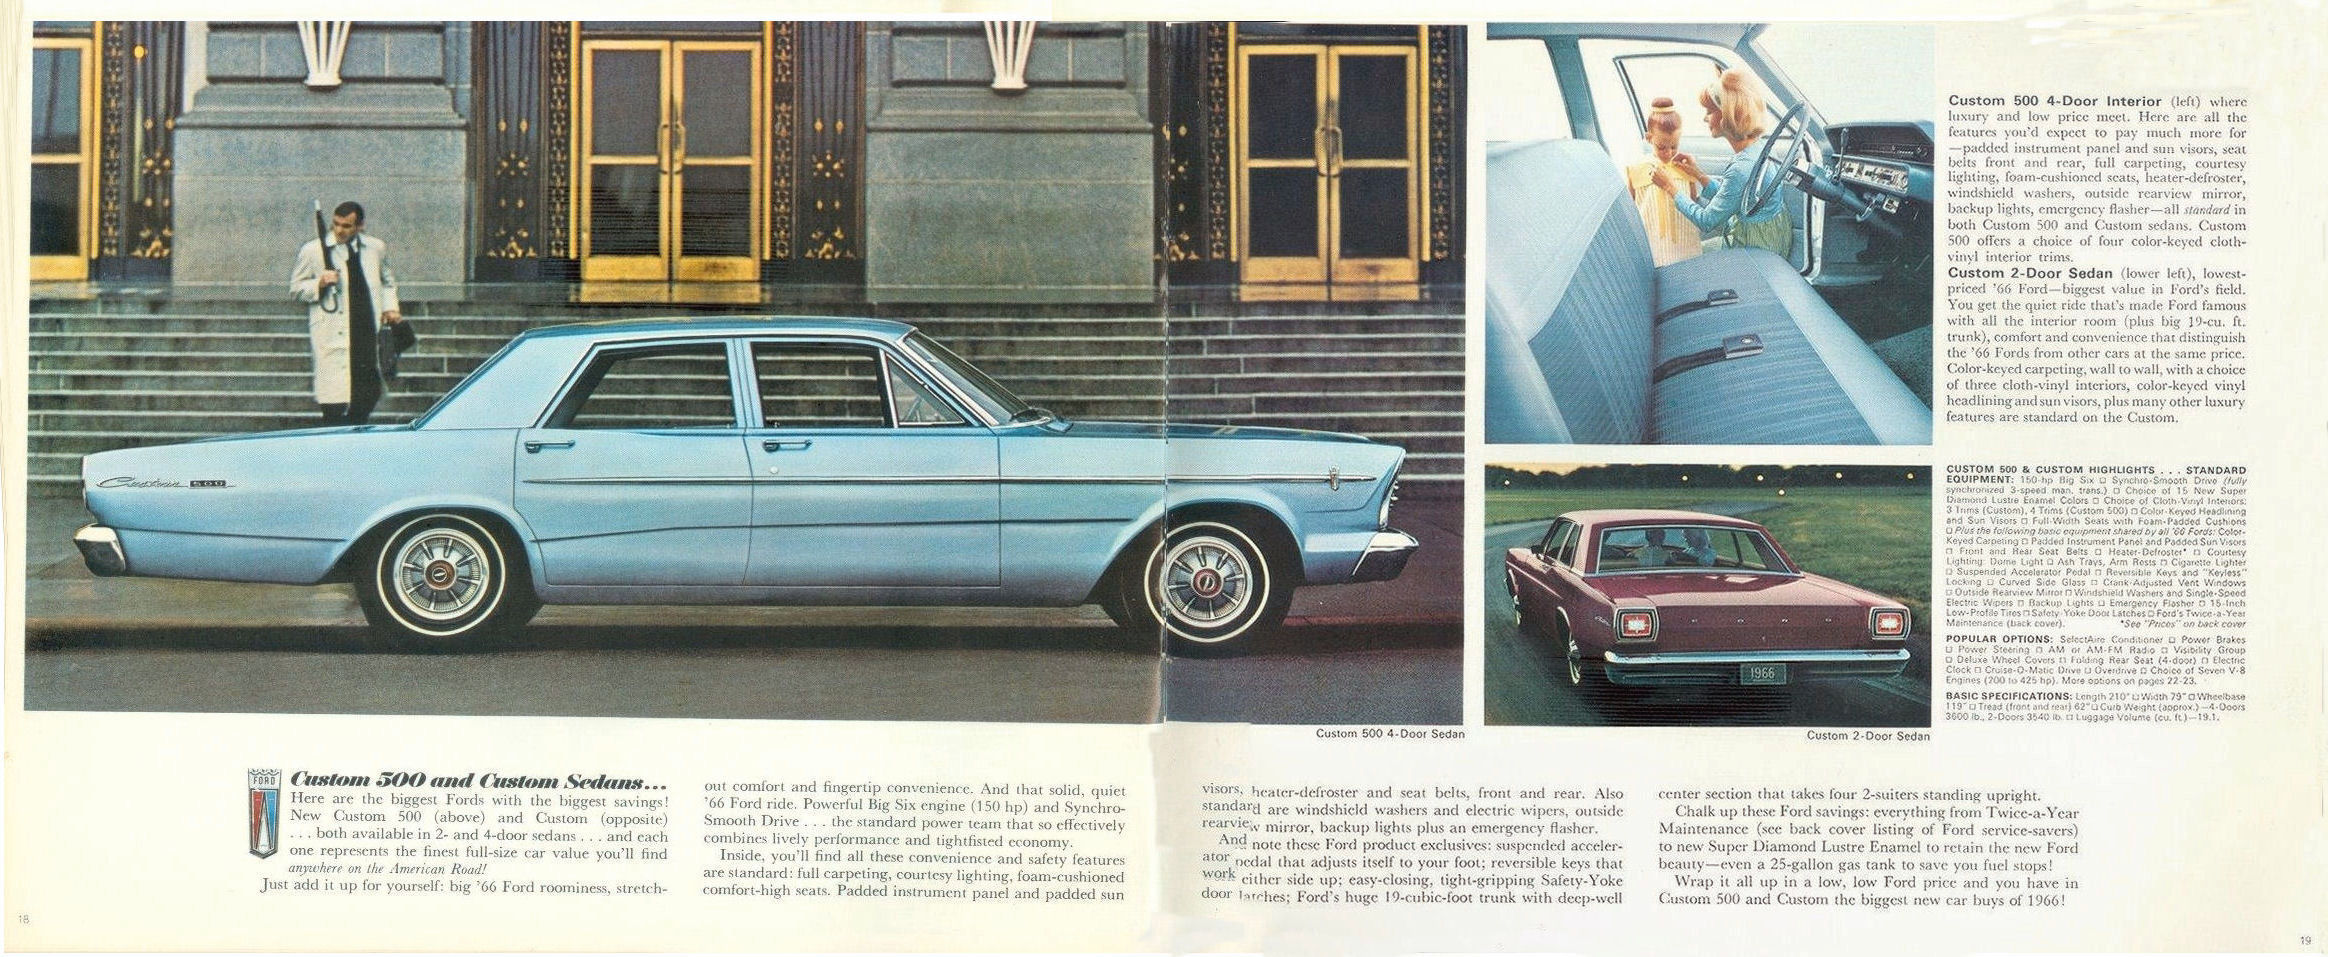 1966_Ford_Full_Size-18-19